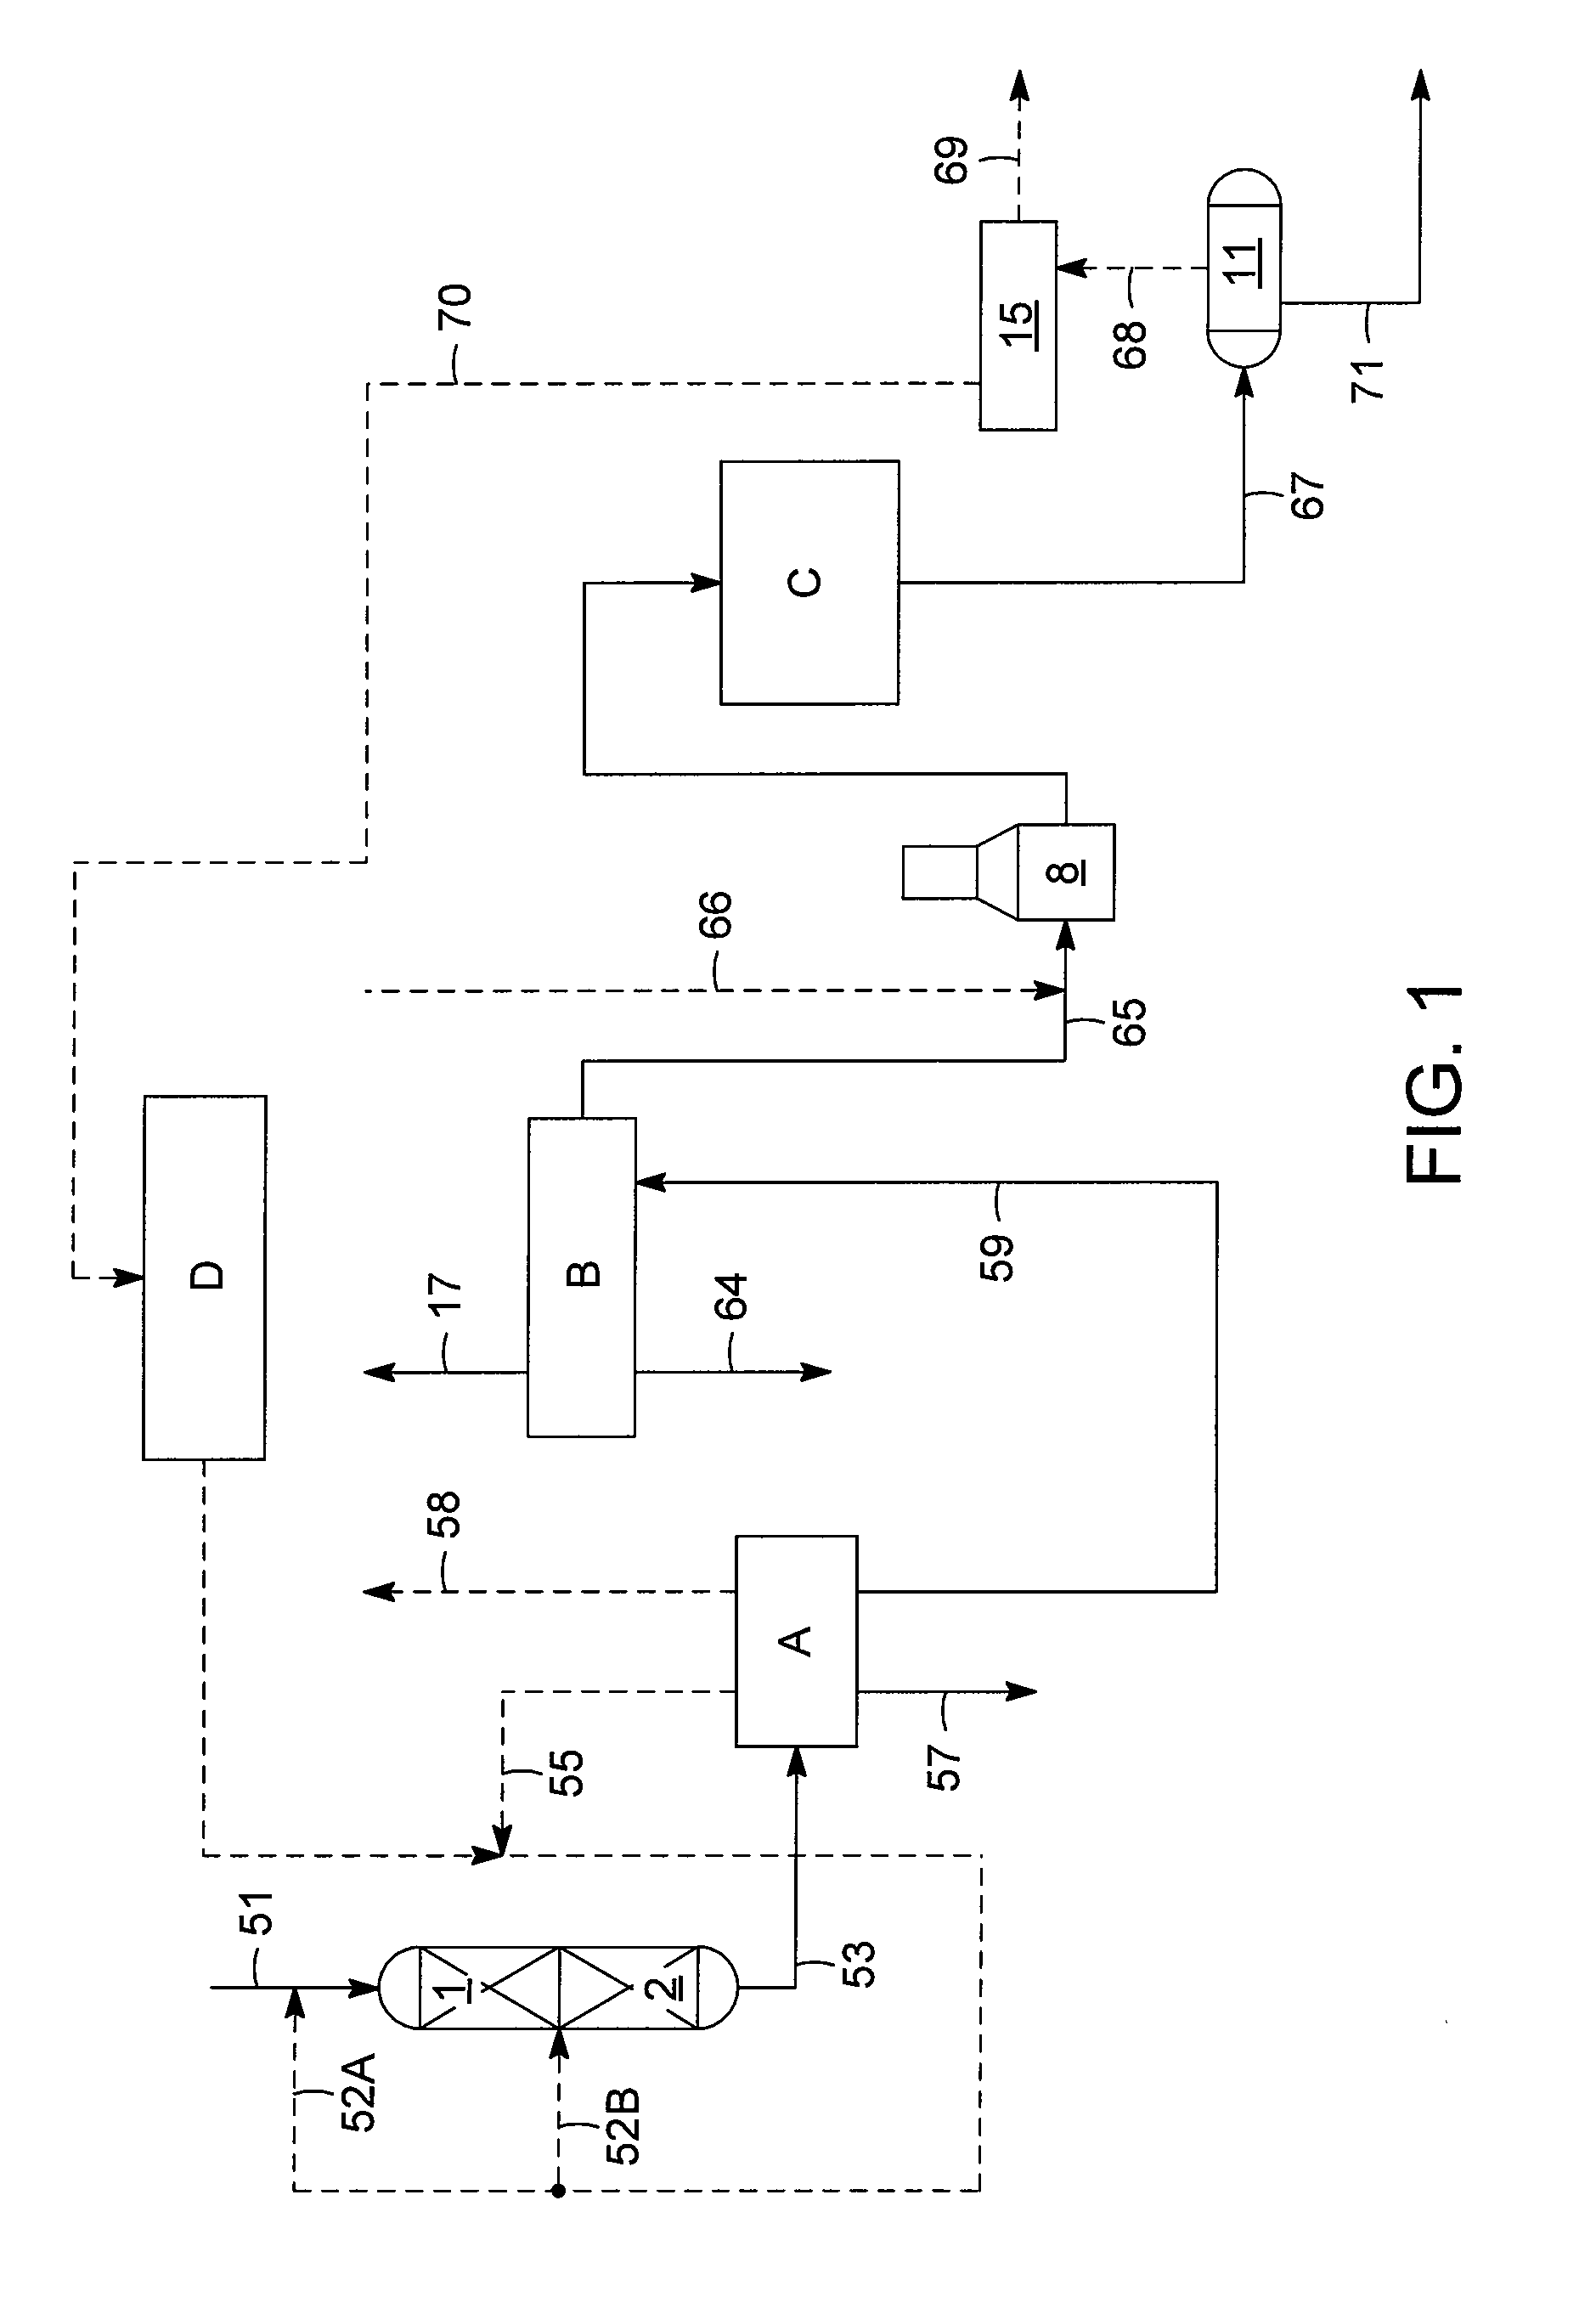 Method for efficient use of hydrogen in aromatics production from heavy aromatics